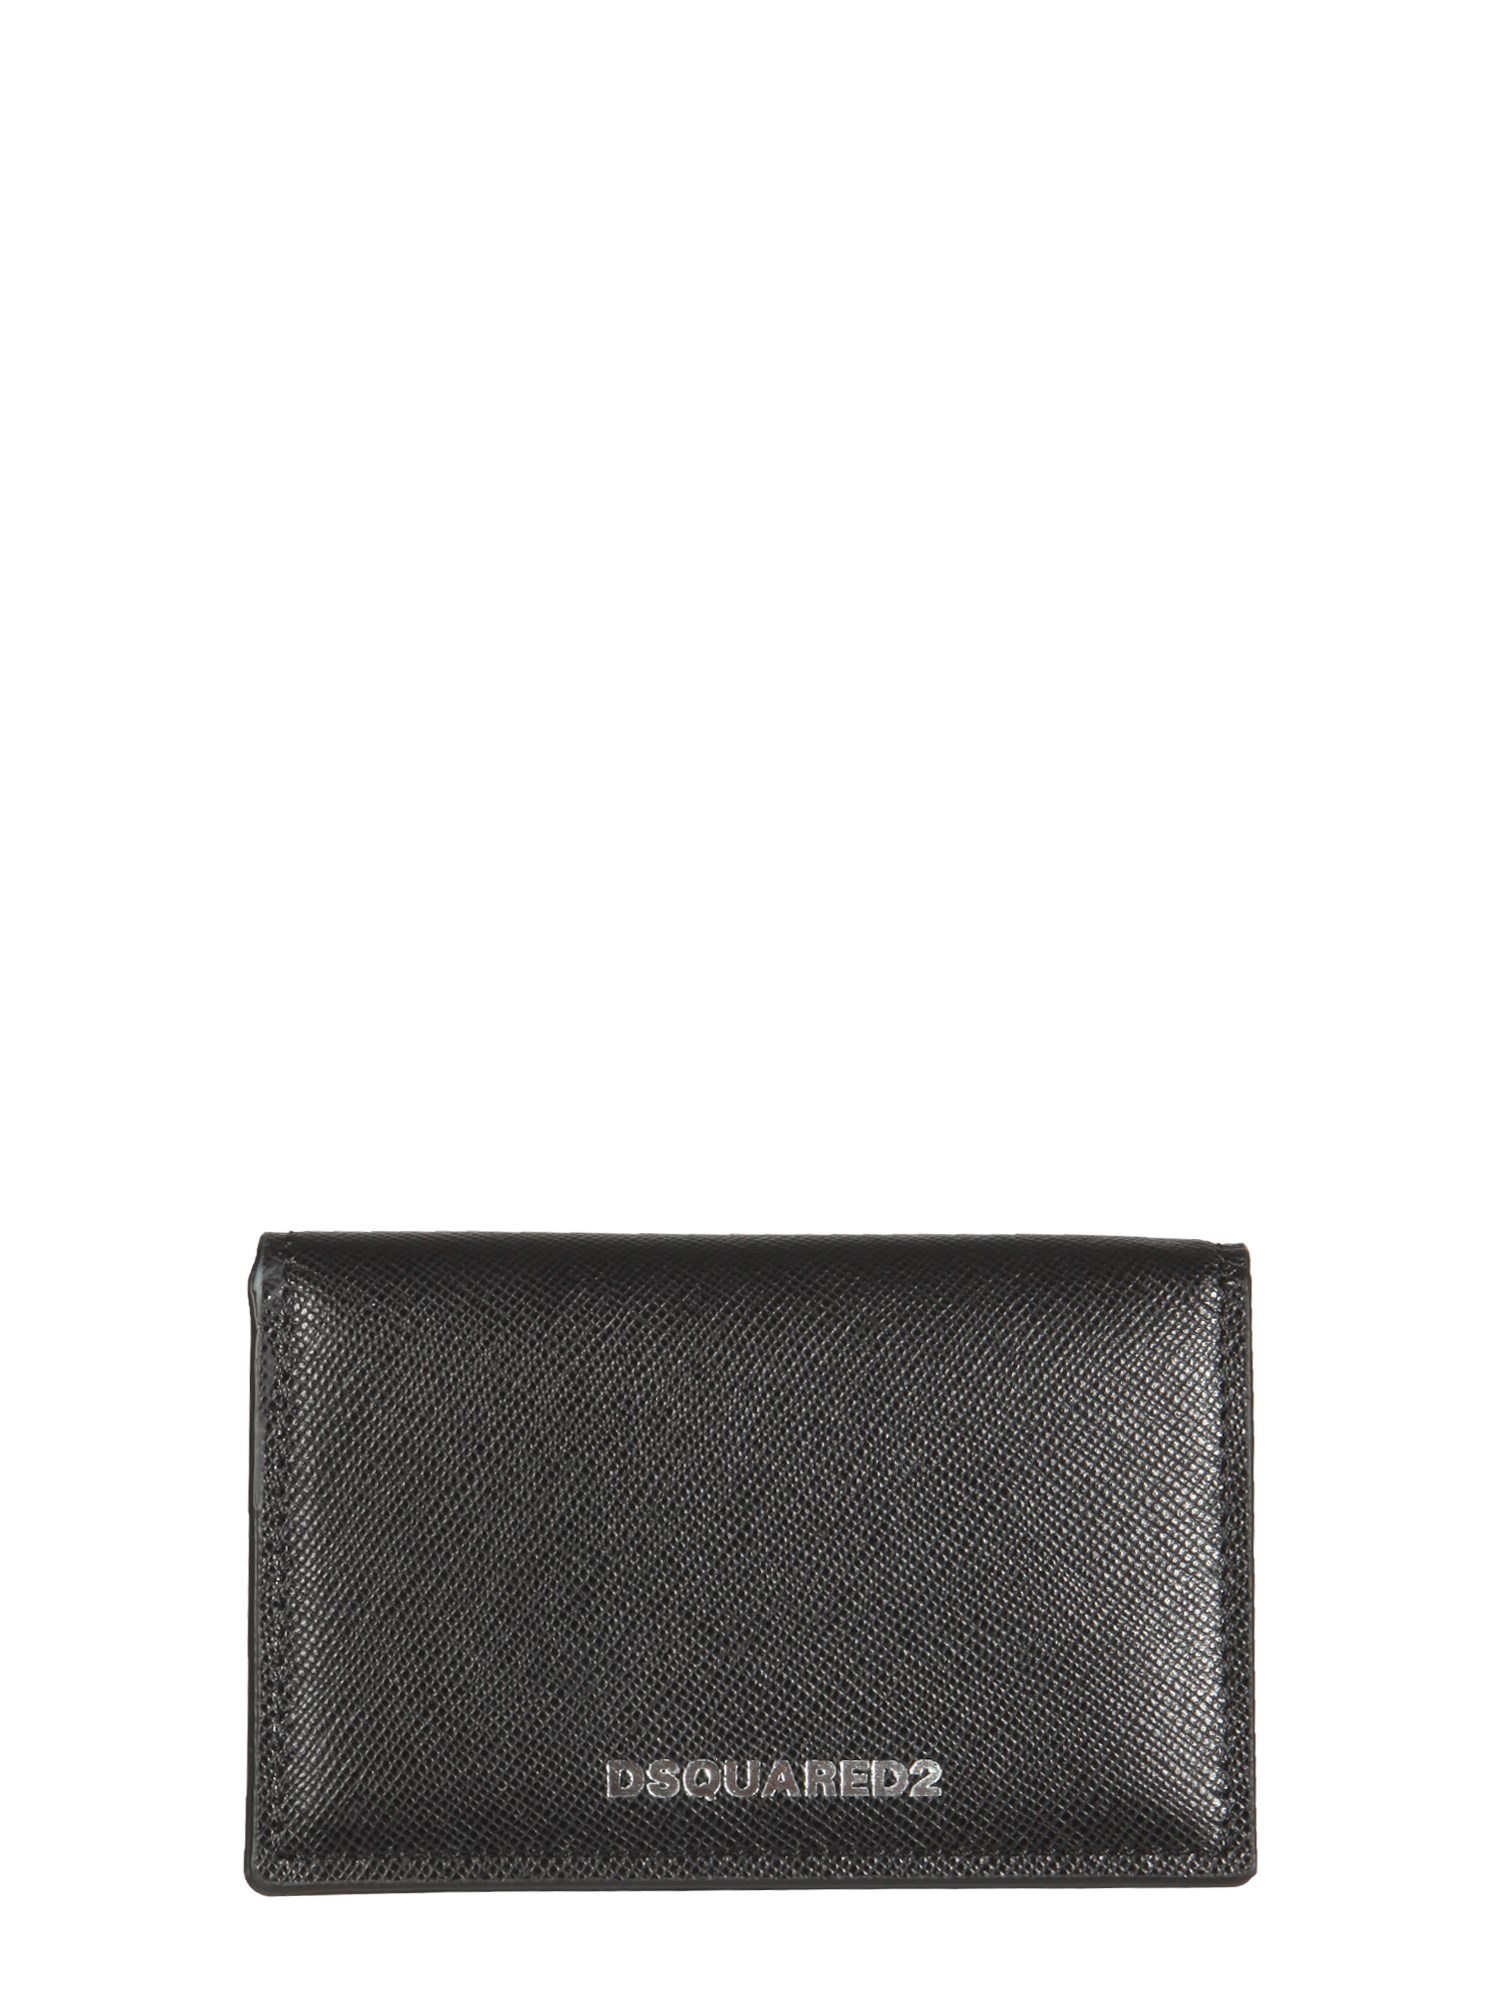 DSQUARED2 LEATHER CARD HOLDER,199146